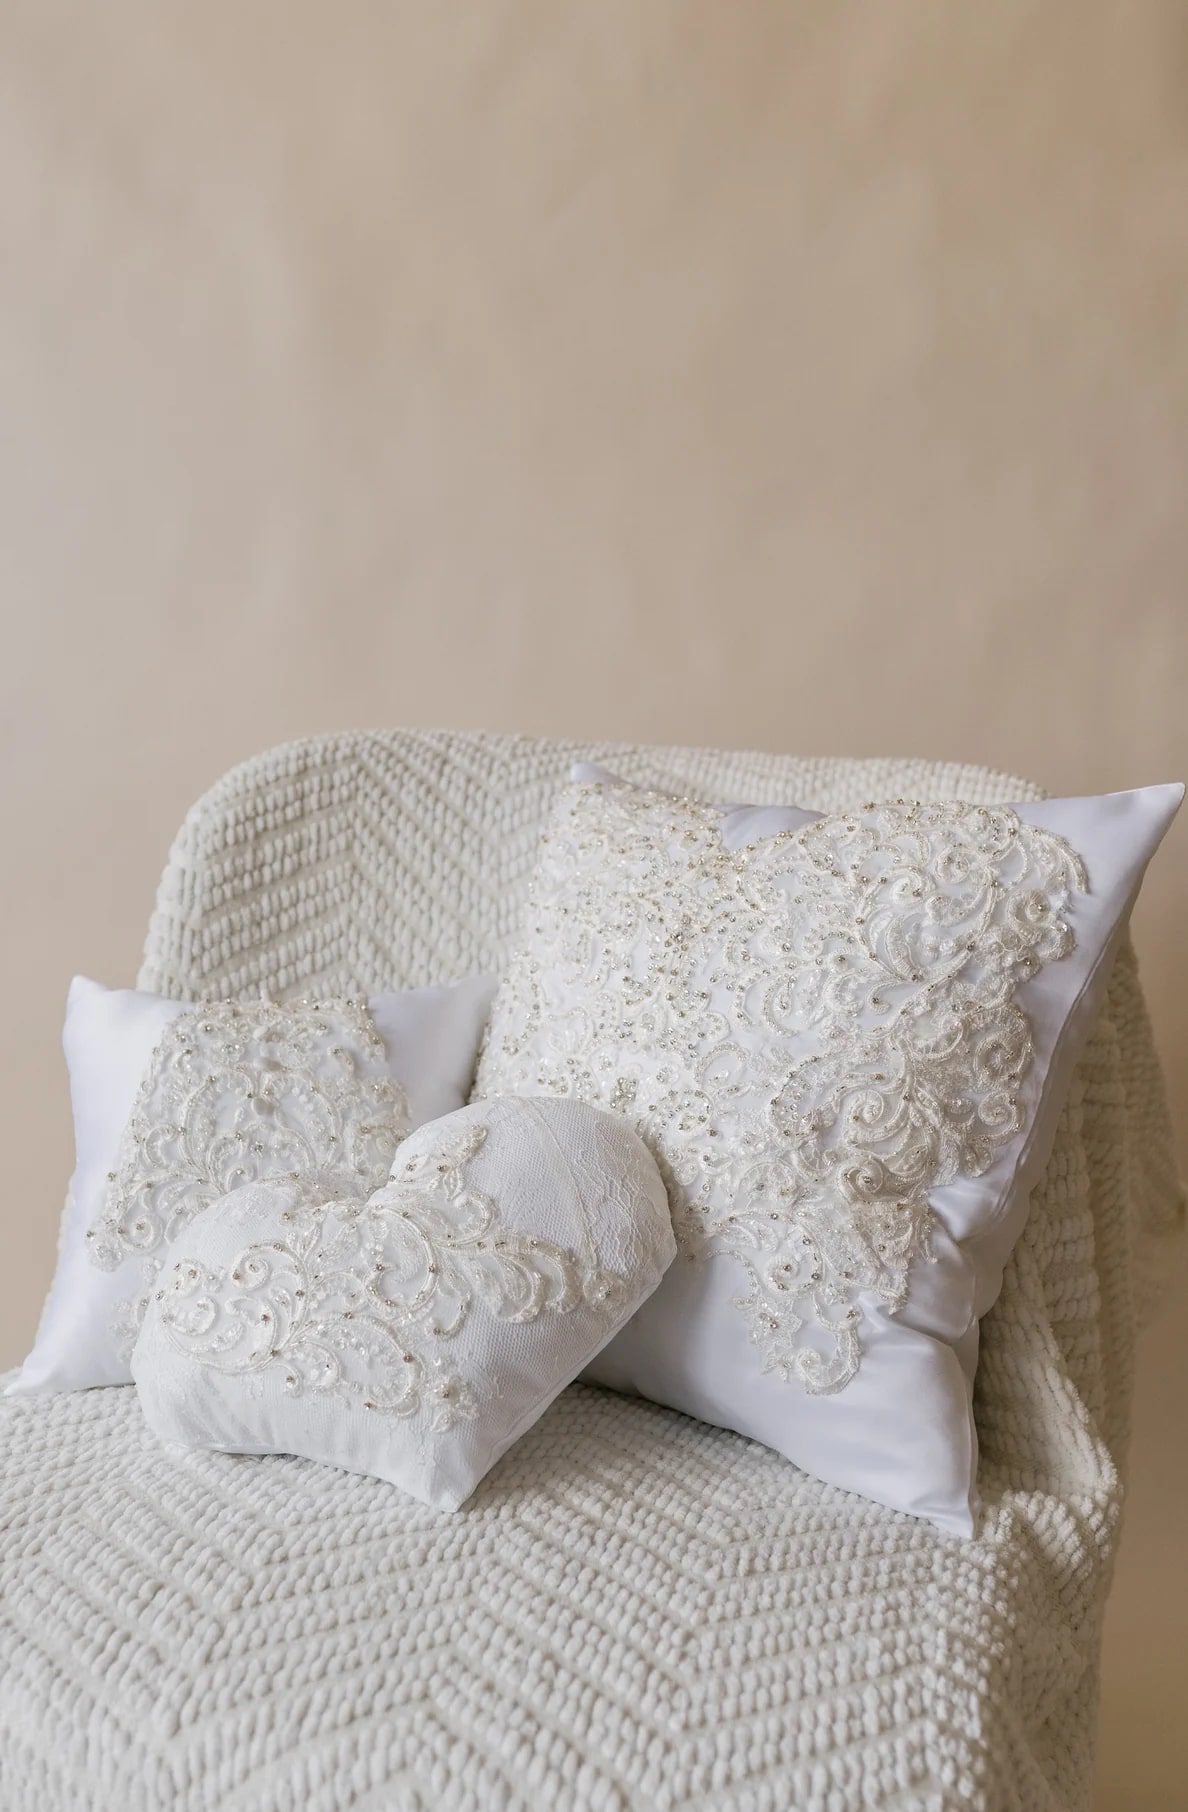 Turn Your Wedding Dress into a Pillow